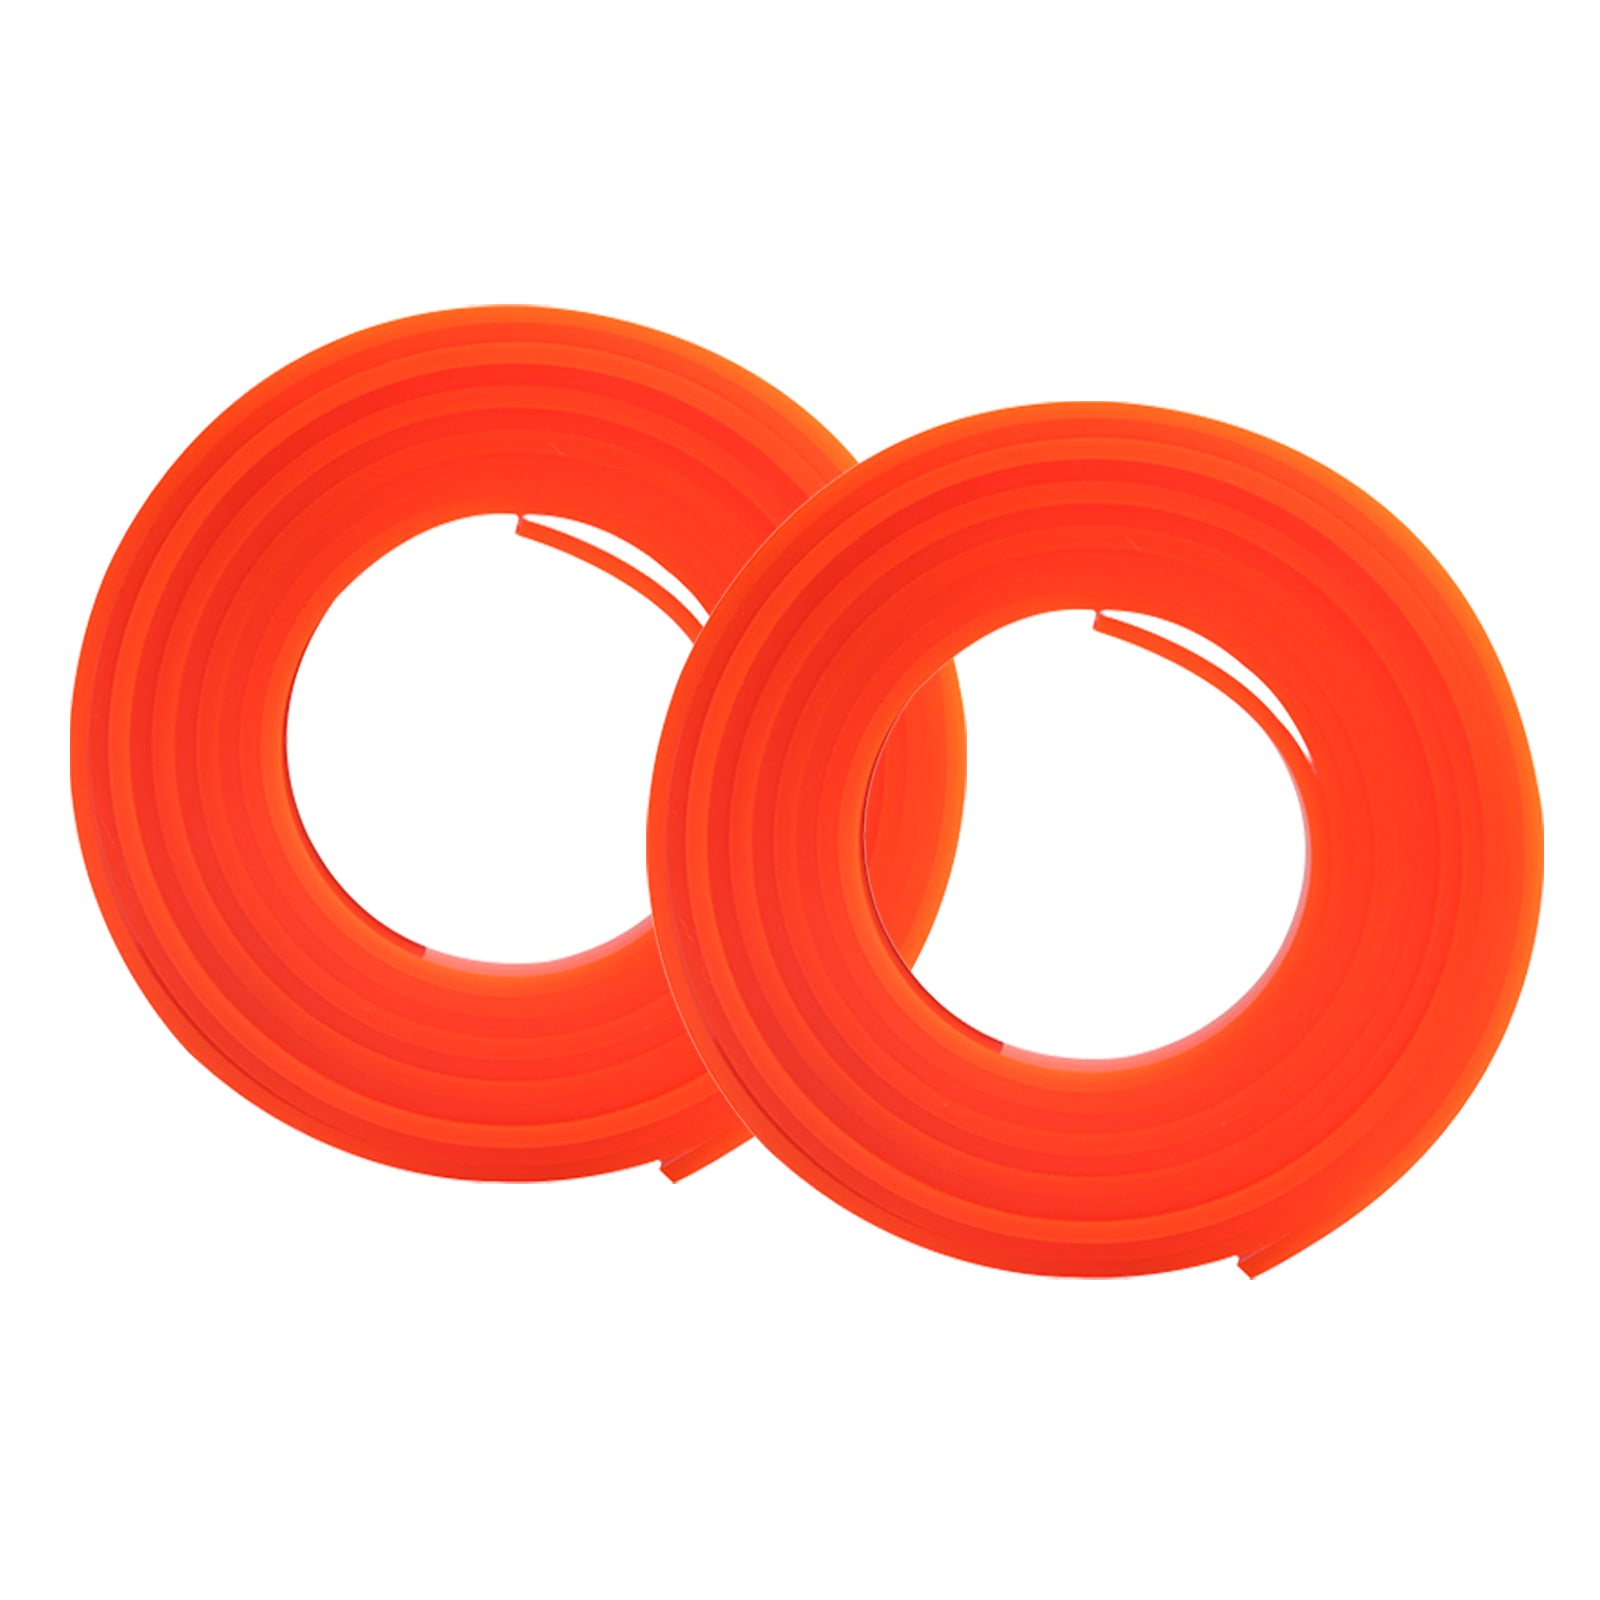 Two rolls of orange Fusion Squeegee Channel Refill, indicating availability for extensive cleaning tasks and efficiency.